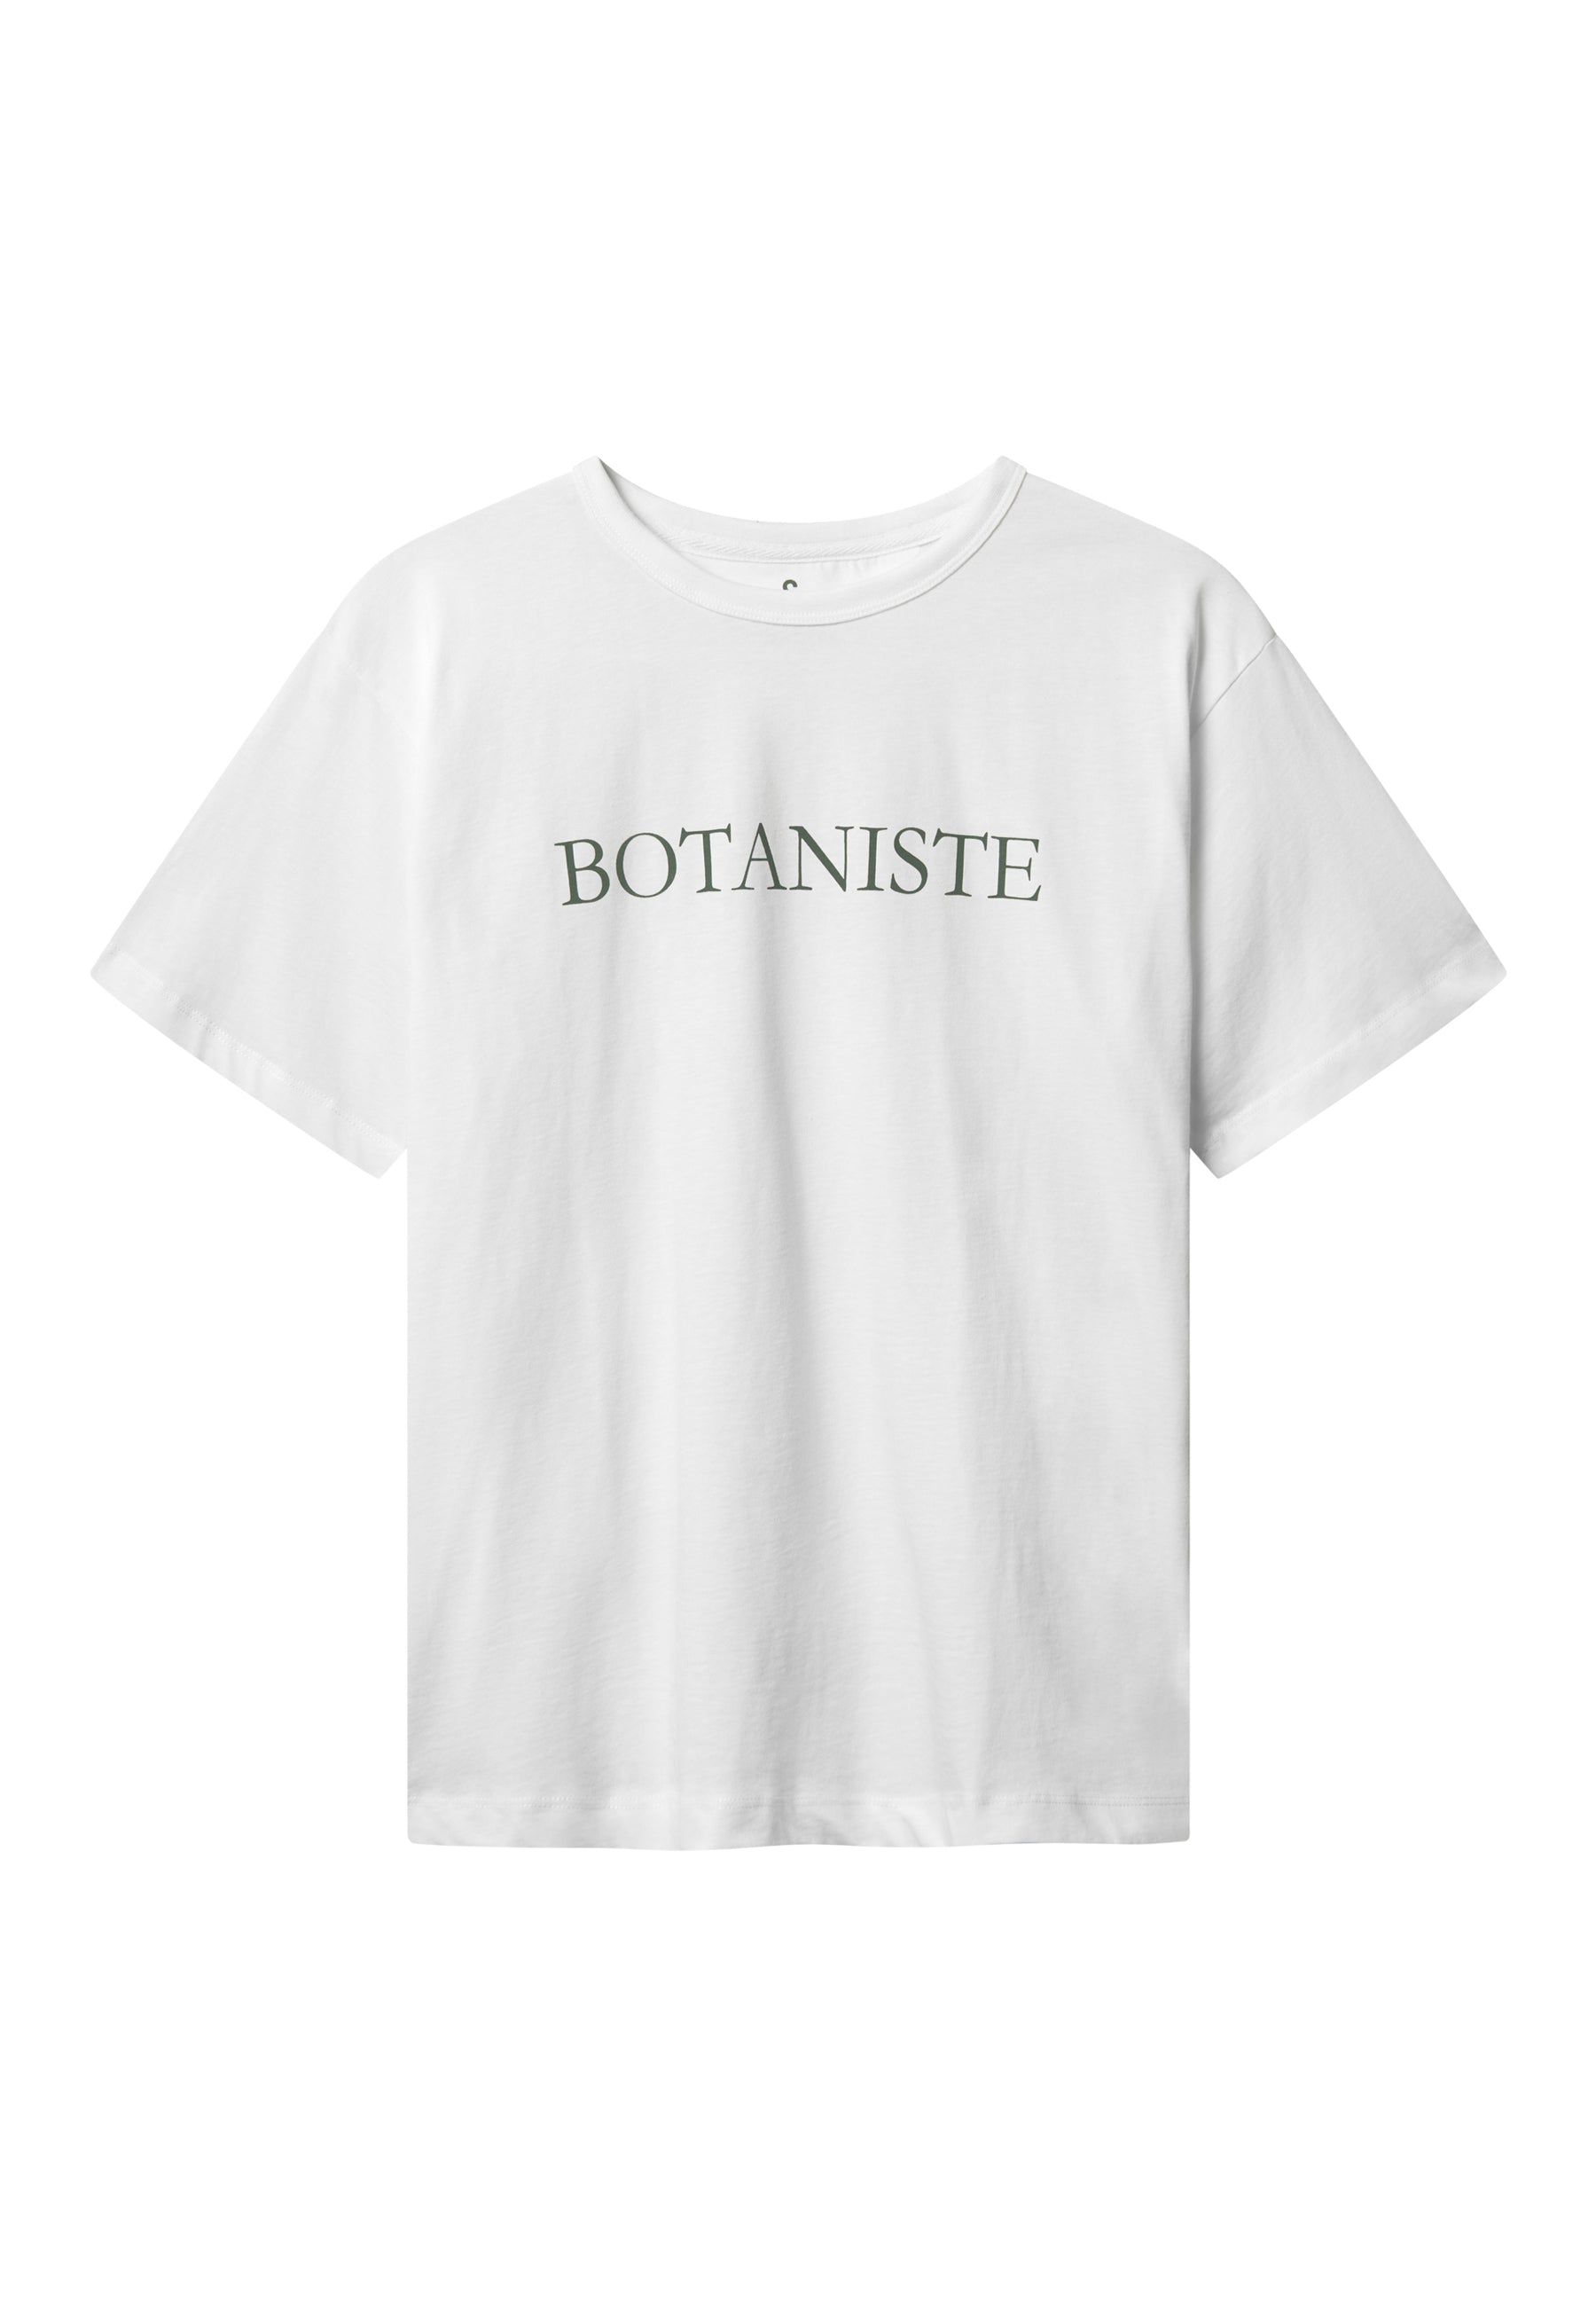 T-Shirt-Botaniste in White T-Shirts Colours and Sons   